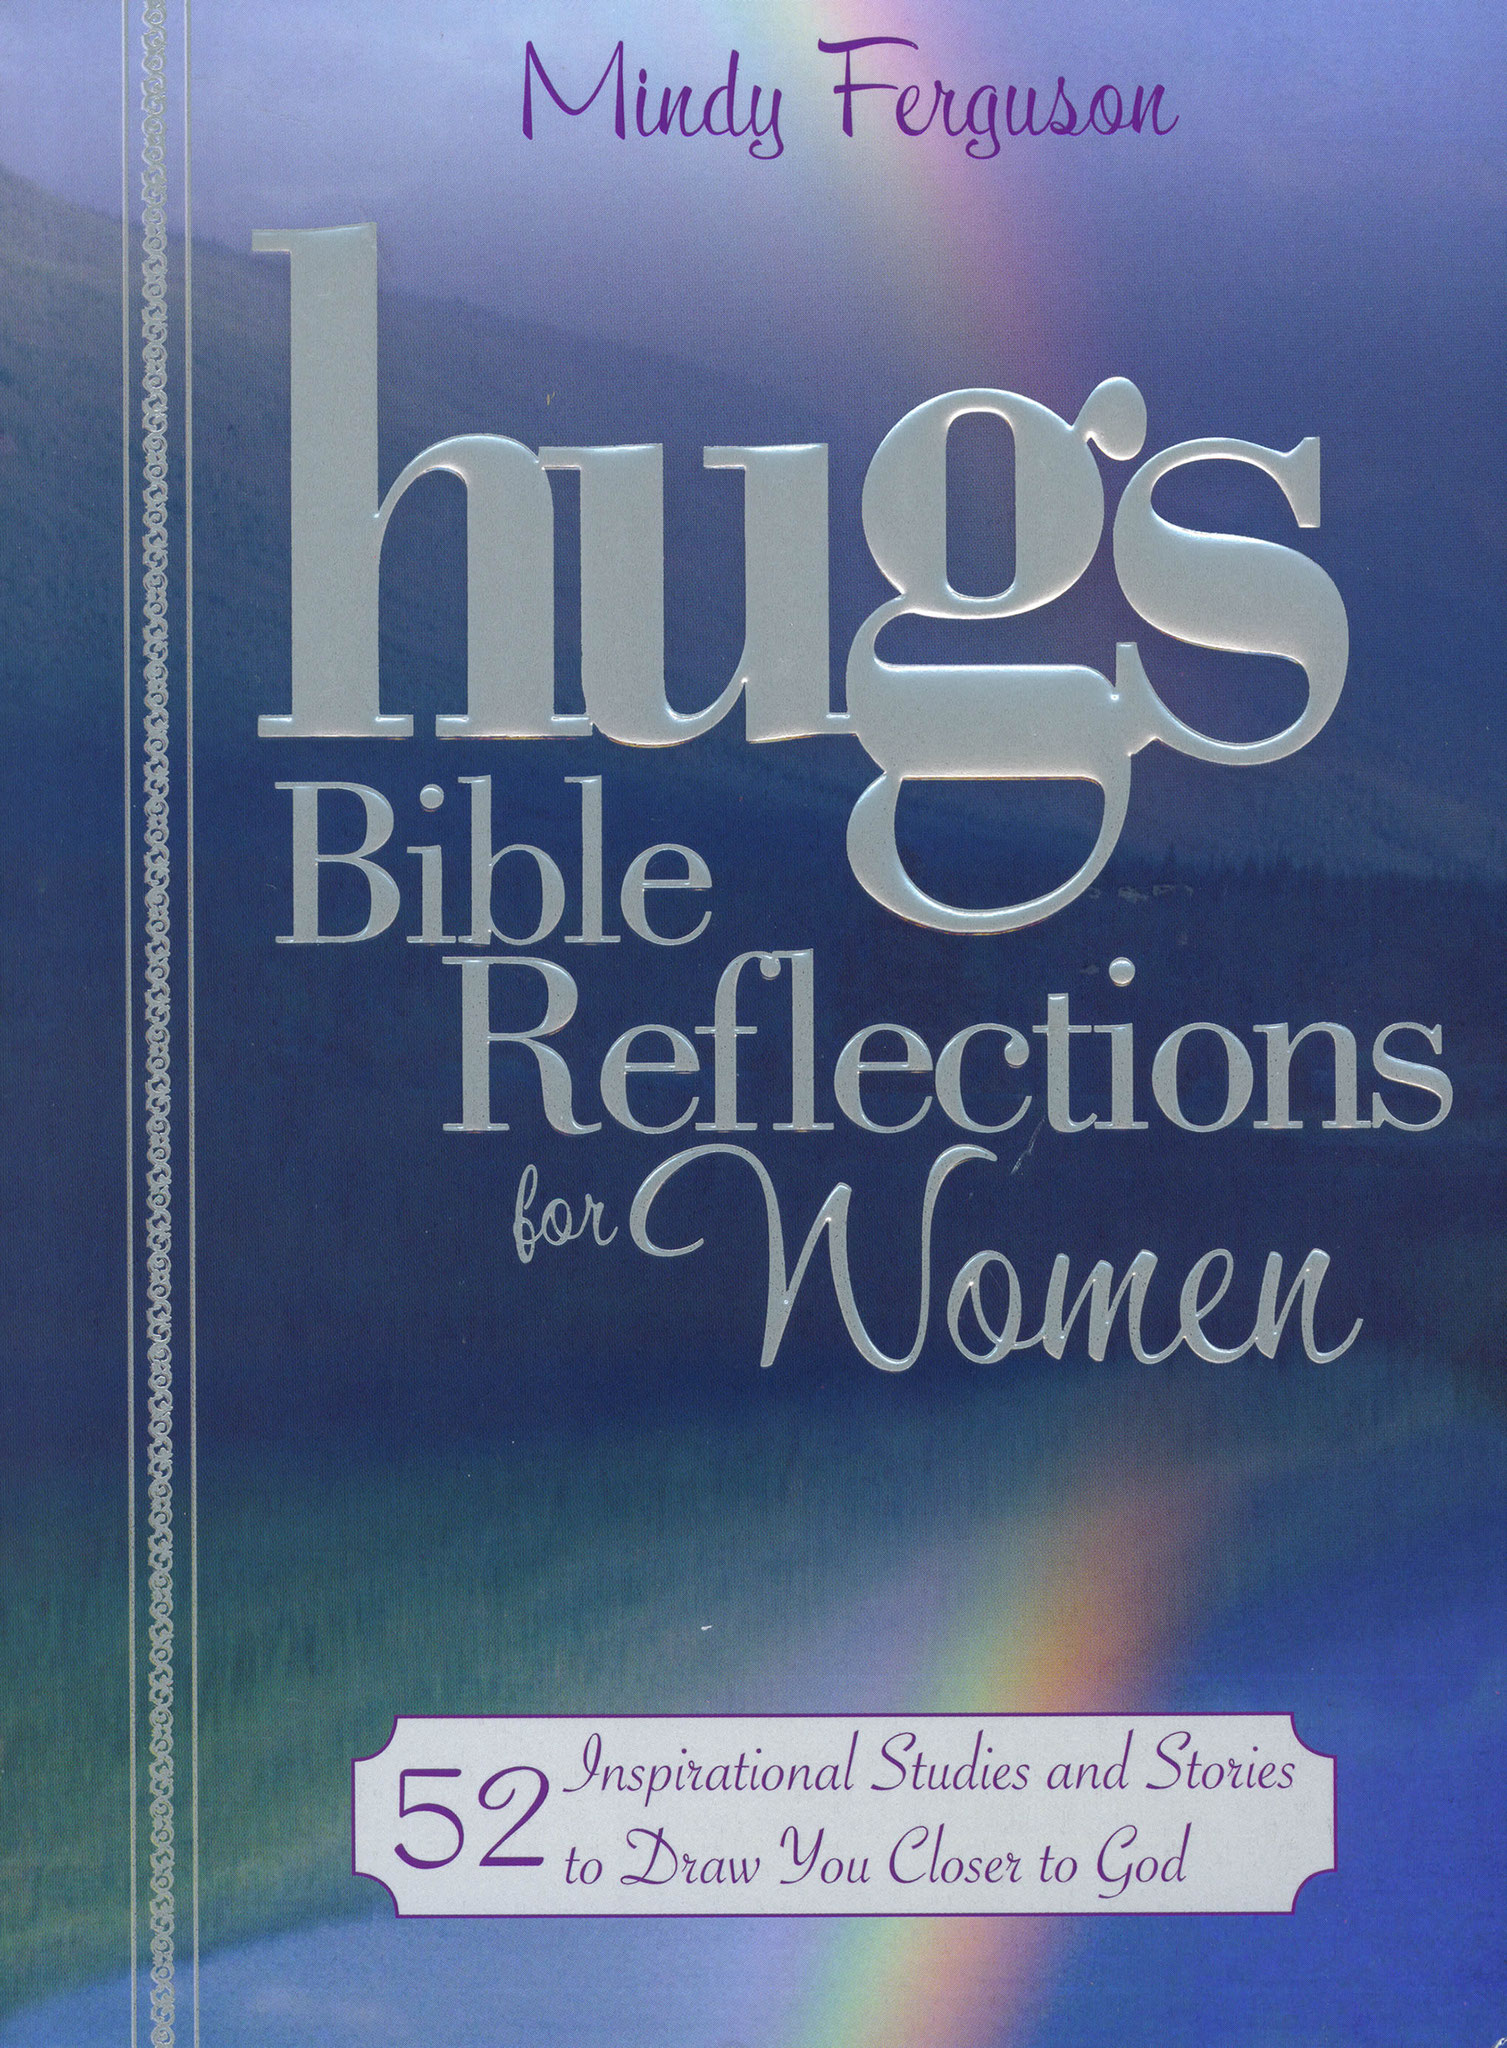 Debbie's favorite hug from God is highlighted in this book sharing various authors' hugs from God